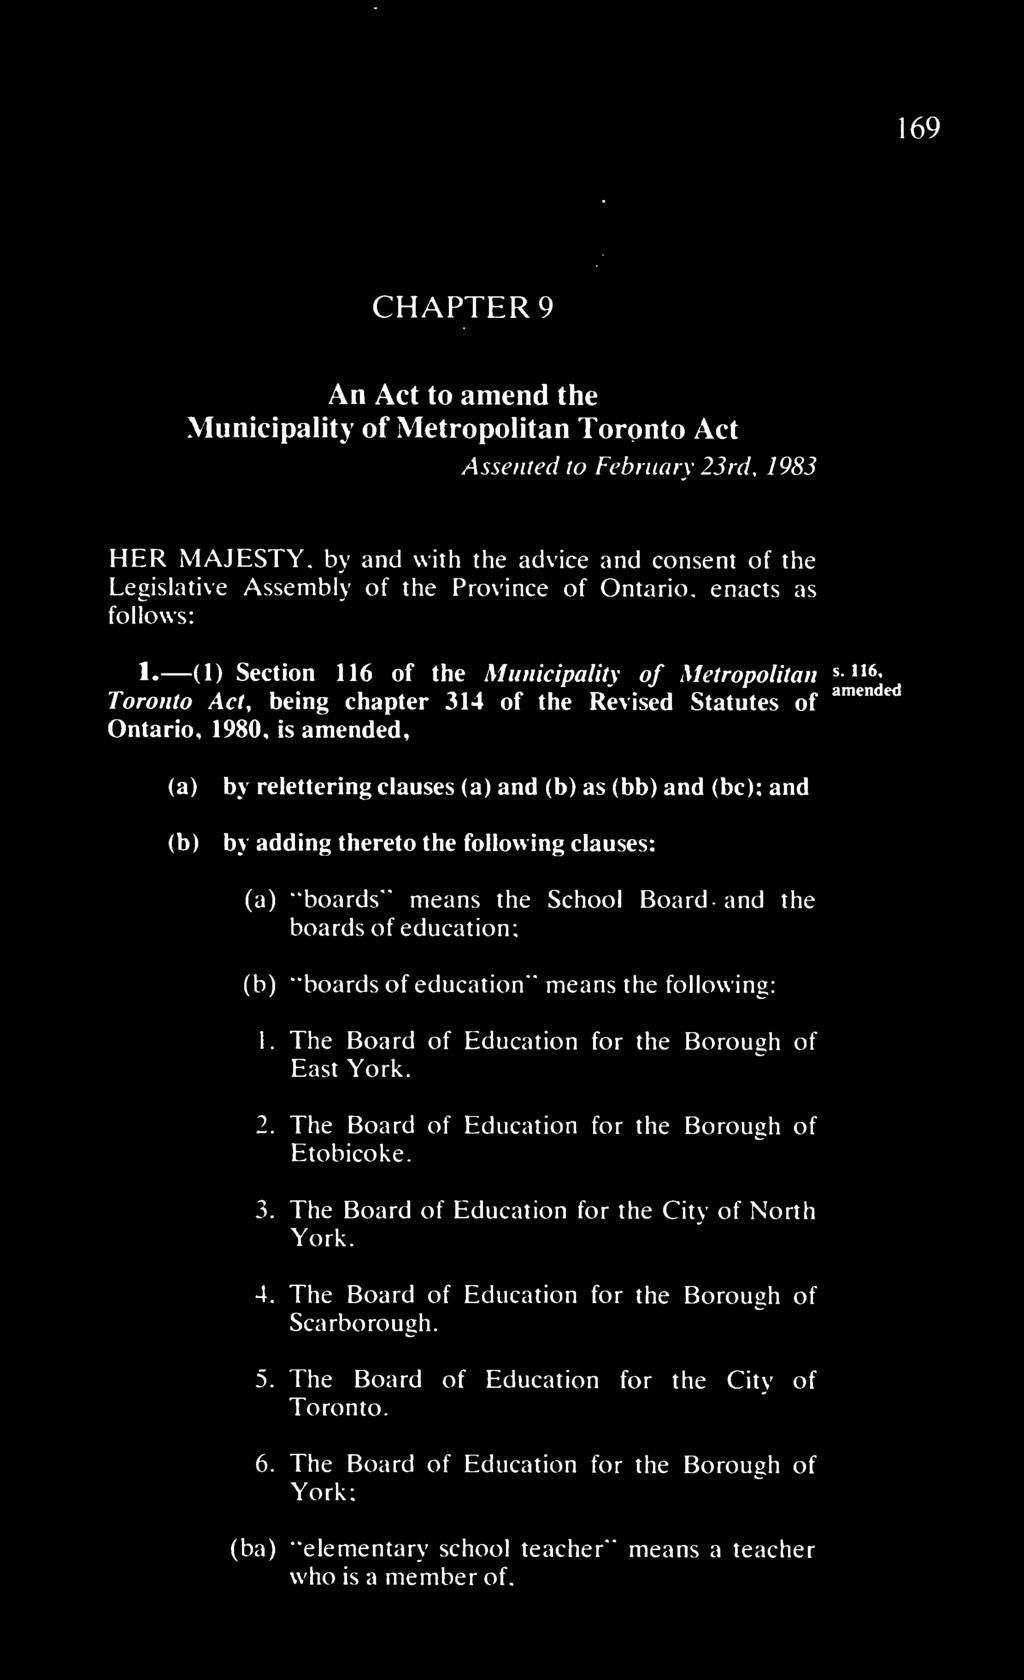 (1) Section 116 of the Municipality of Metropolitan s-^'*' Toronto Act, being chapter 314 of the Revised Statutes of *"^ Ontario, 1980, is amended, by relettering clauses and (b) as (bb) and (be);